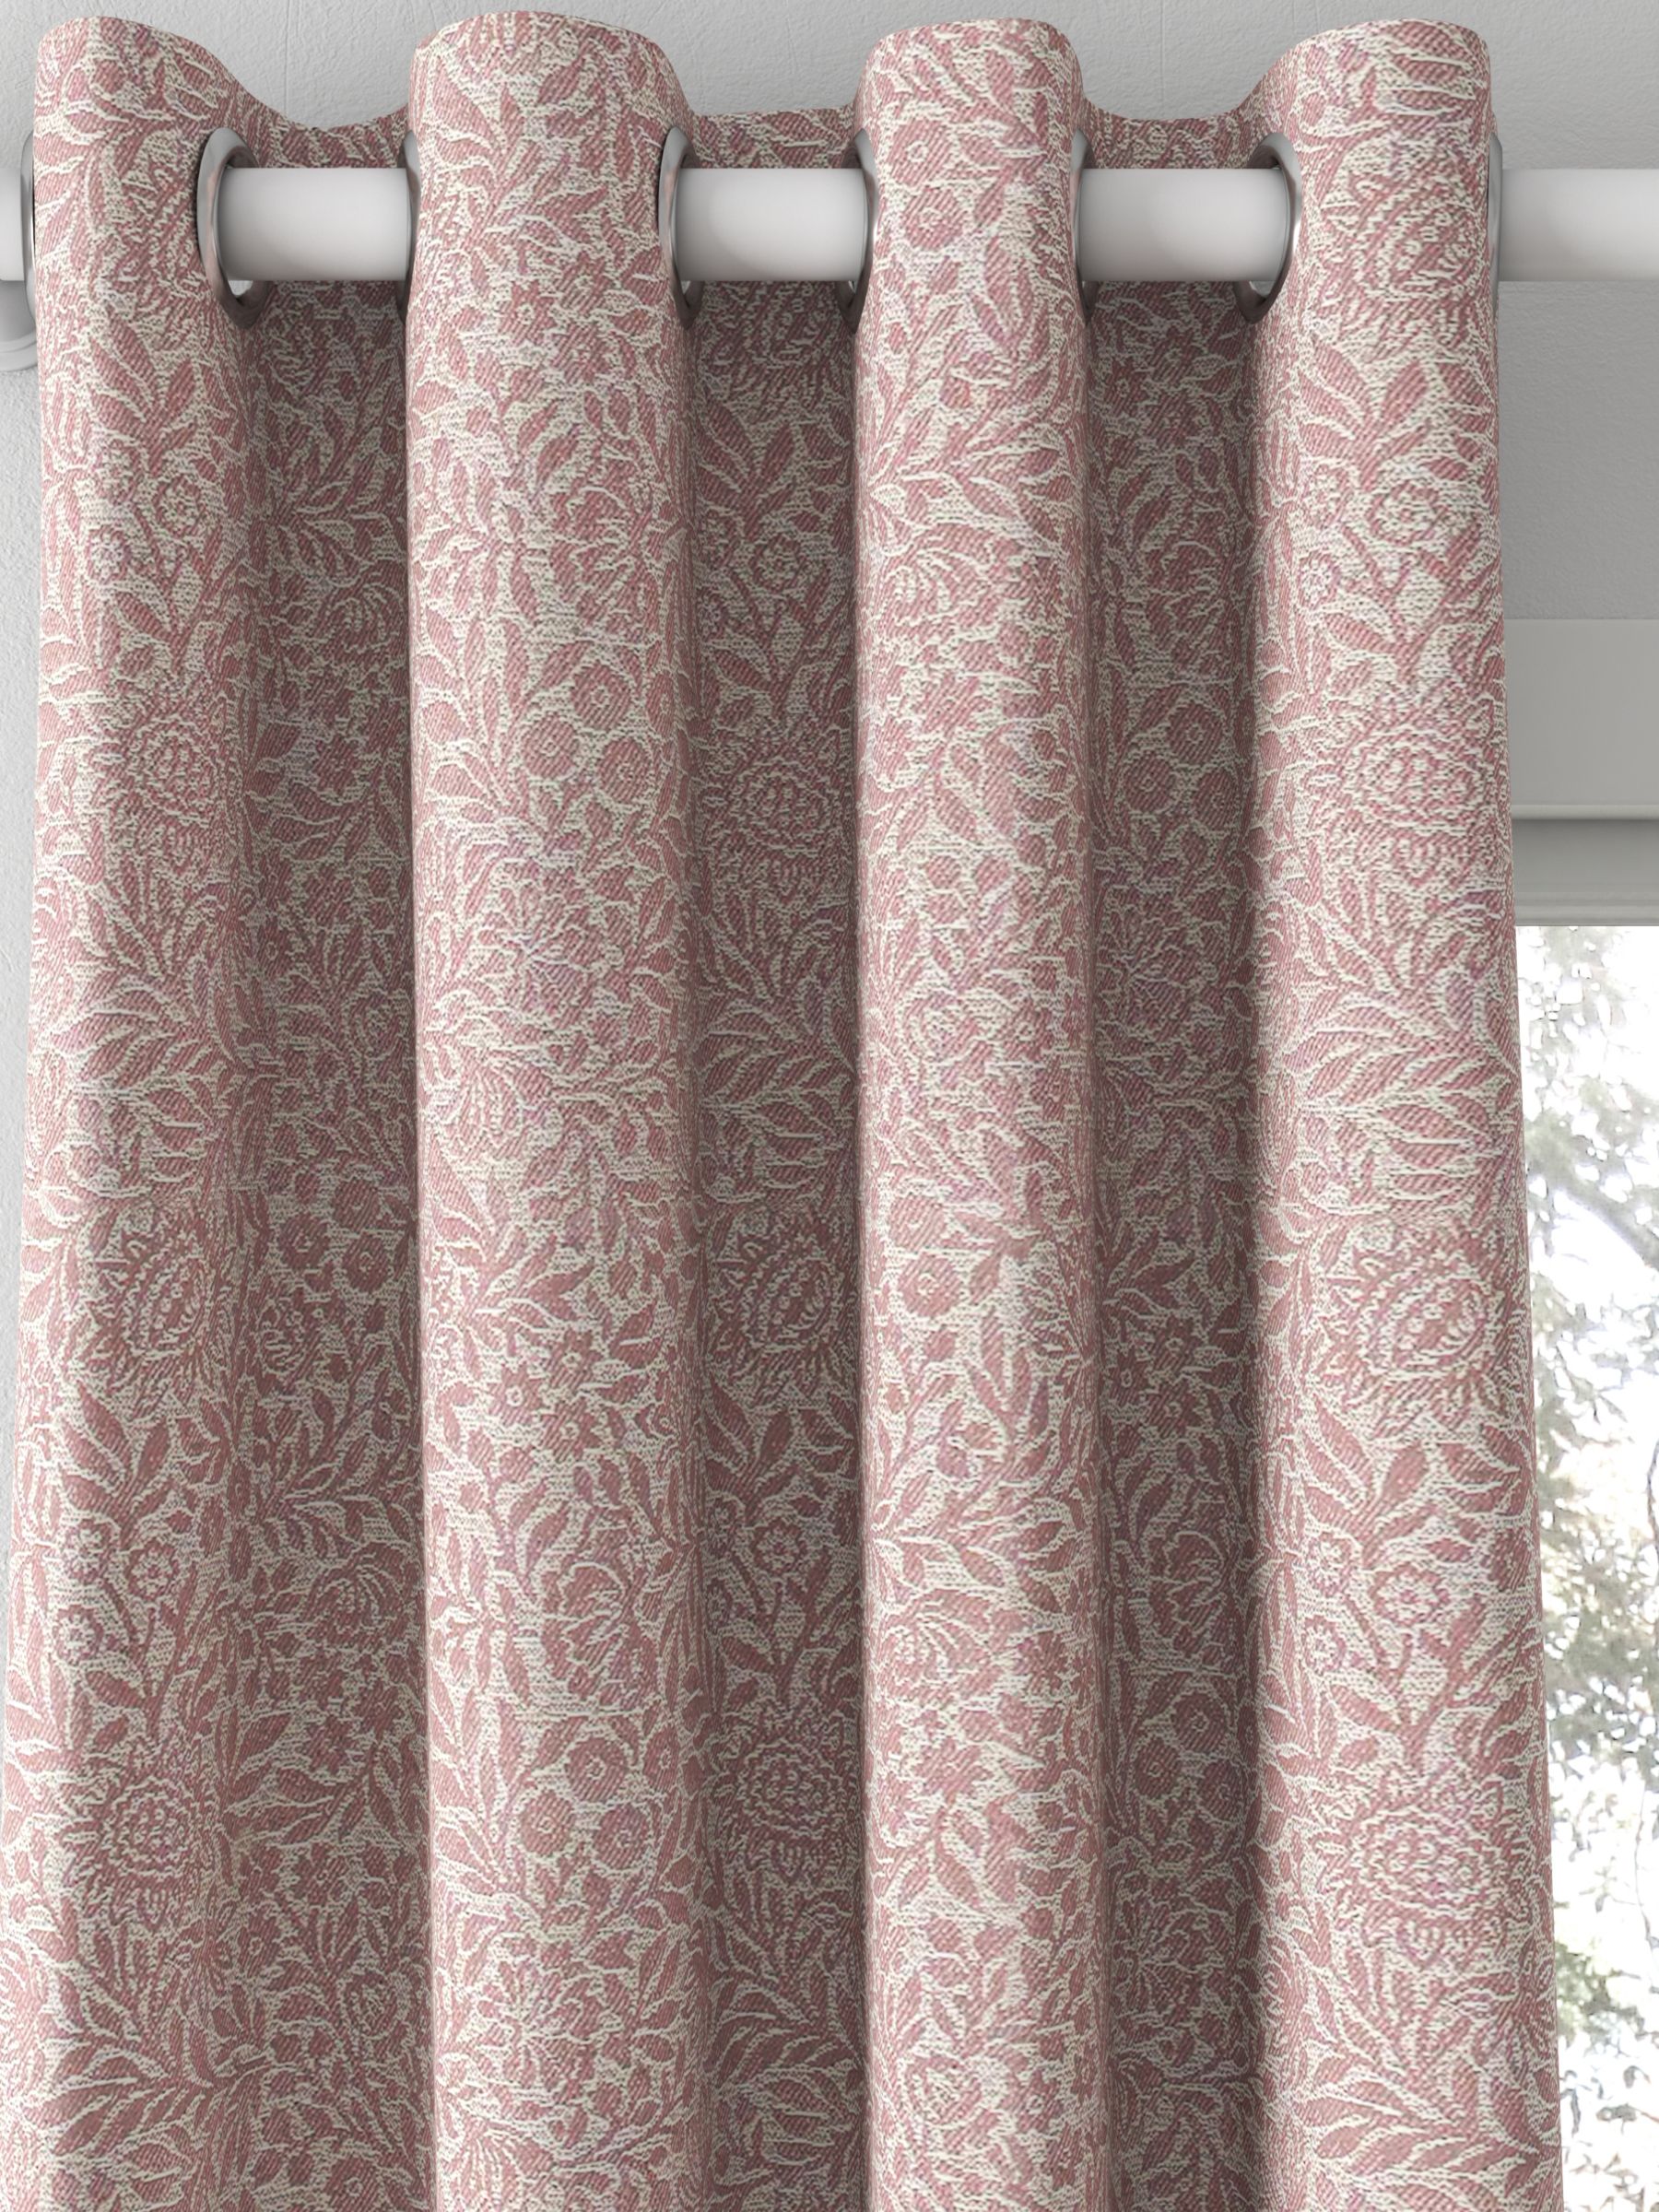 John Lewis & Partners Hidcote Weave Made to Measure Curtains or Roman